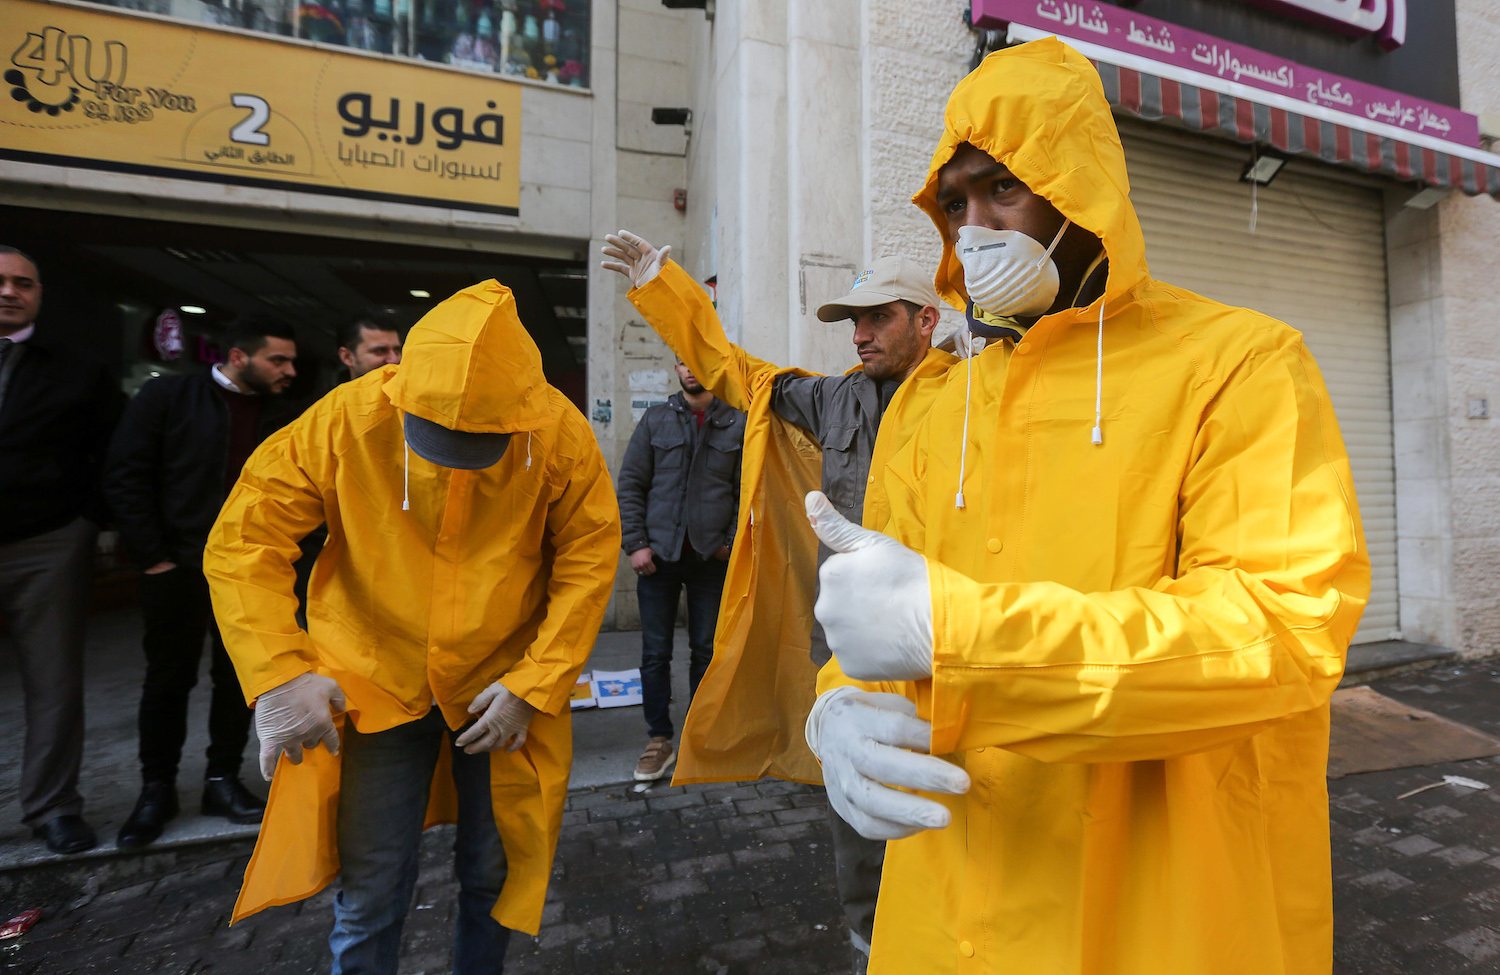 Workers disinfect a mall in the West Bank city of Hebron, March 15, 2020, as part of measures to prevent the spread of the coronavirus. (Wisam Hashlamoun/Flash90)